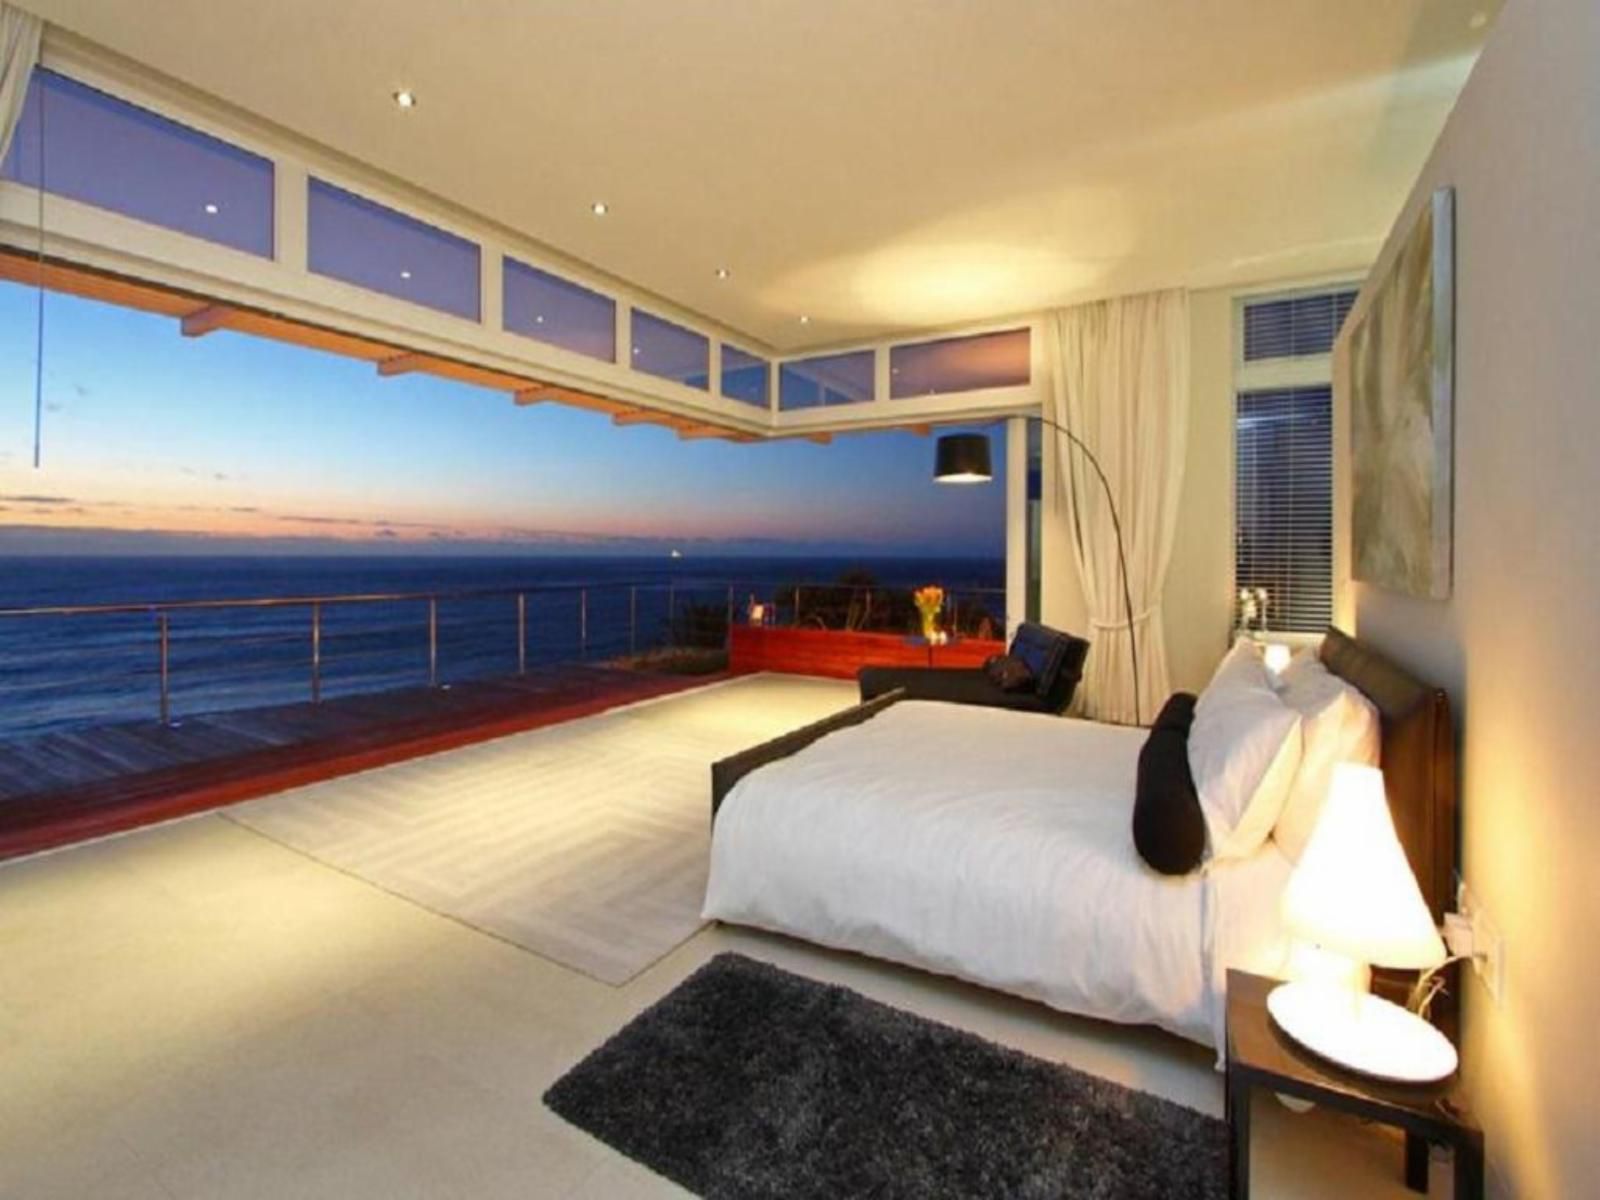 Villa Dolce Vita Camps Bay Cape Town Western Cape South Africa Bedroom